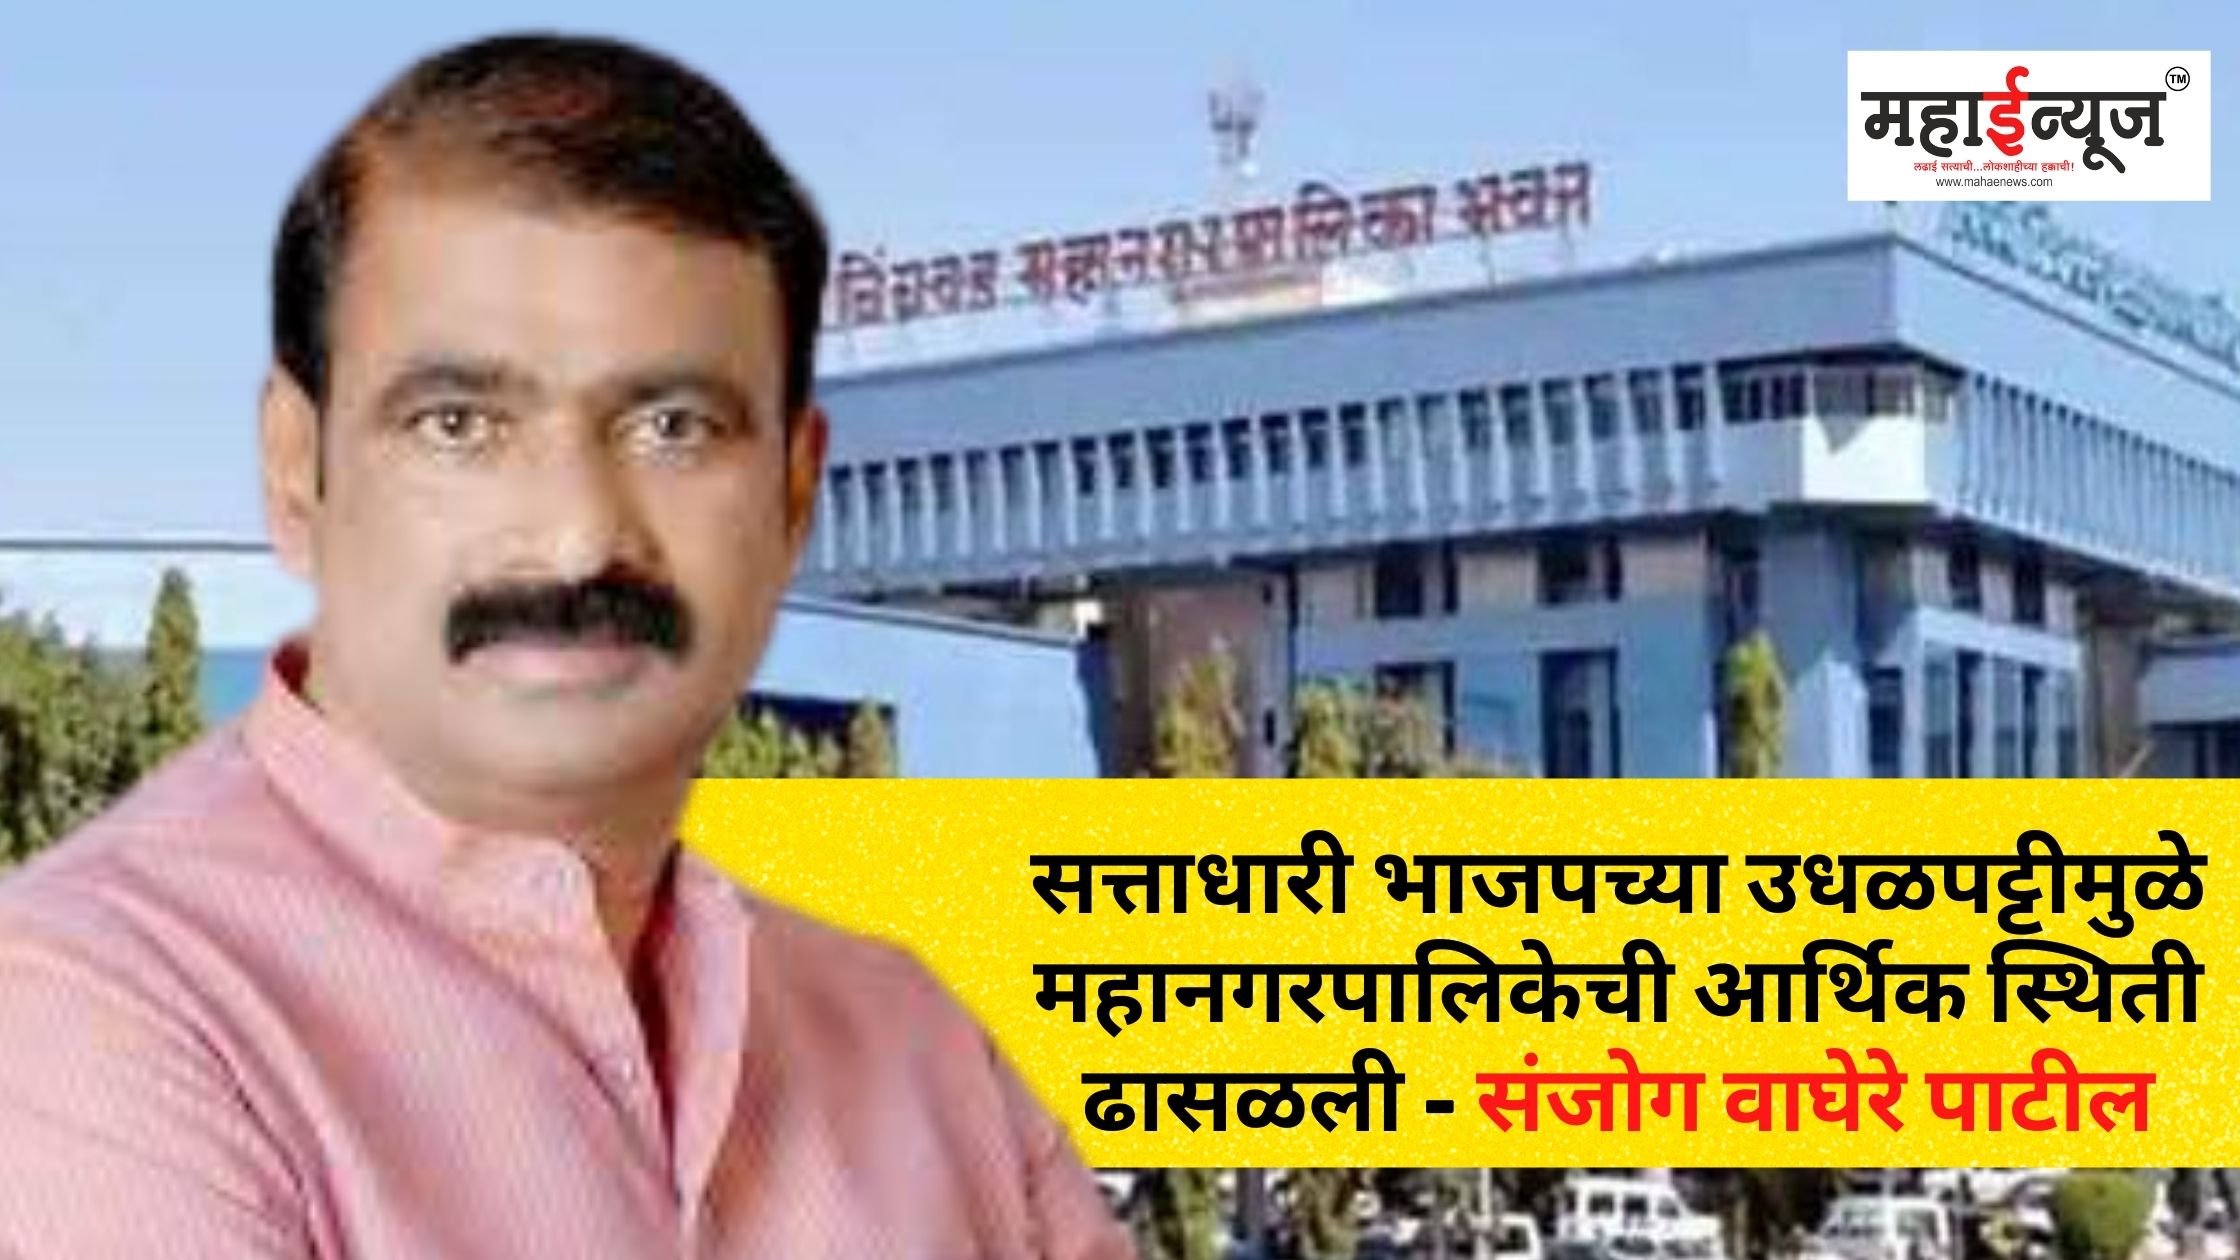 The financial condition of the corporation has deteriorated due to the wastefulness of the ruling BJP - Sanjog Waghere Patil